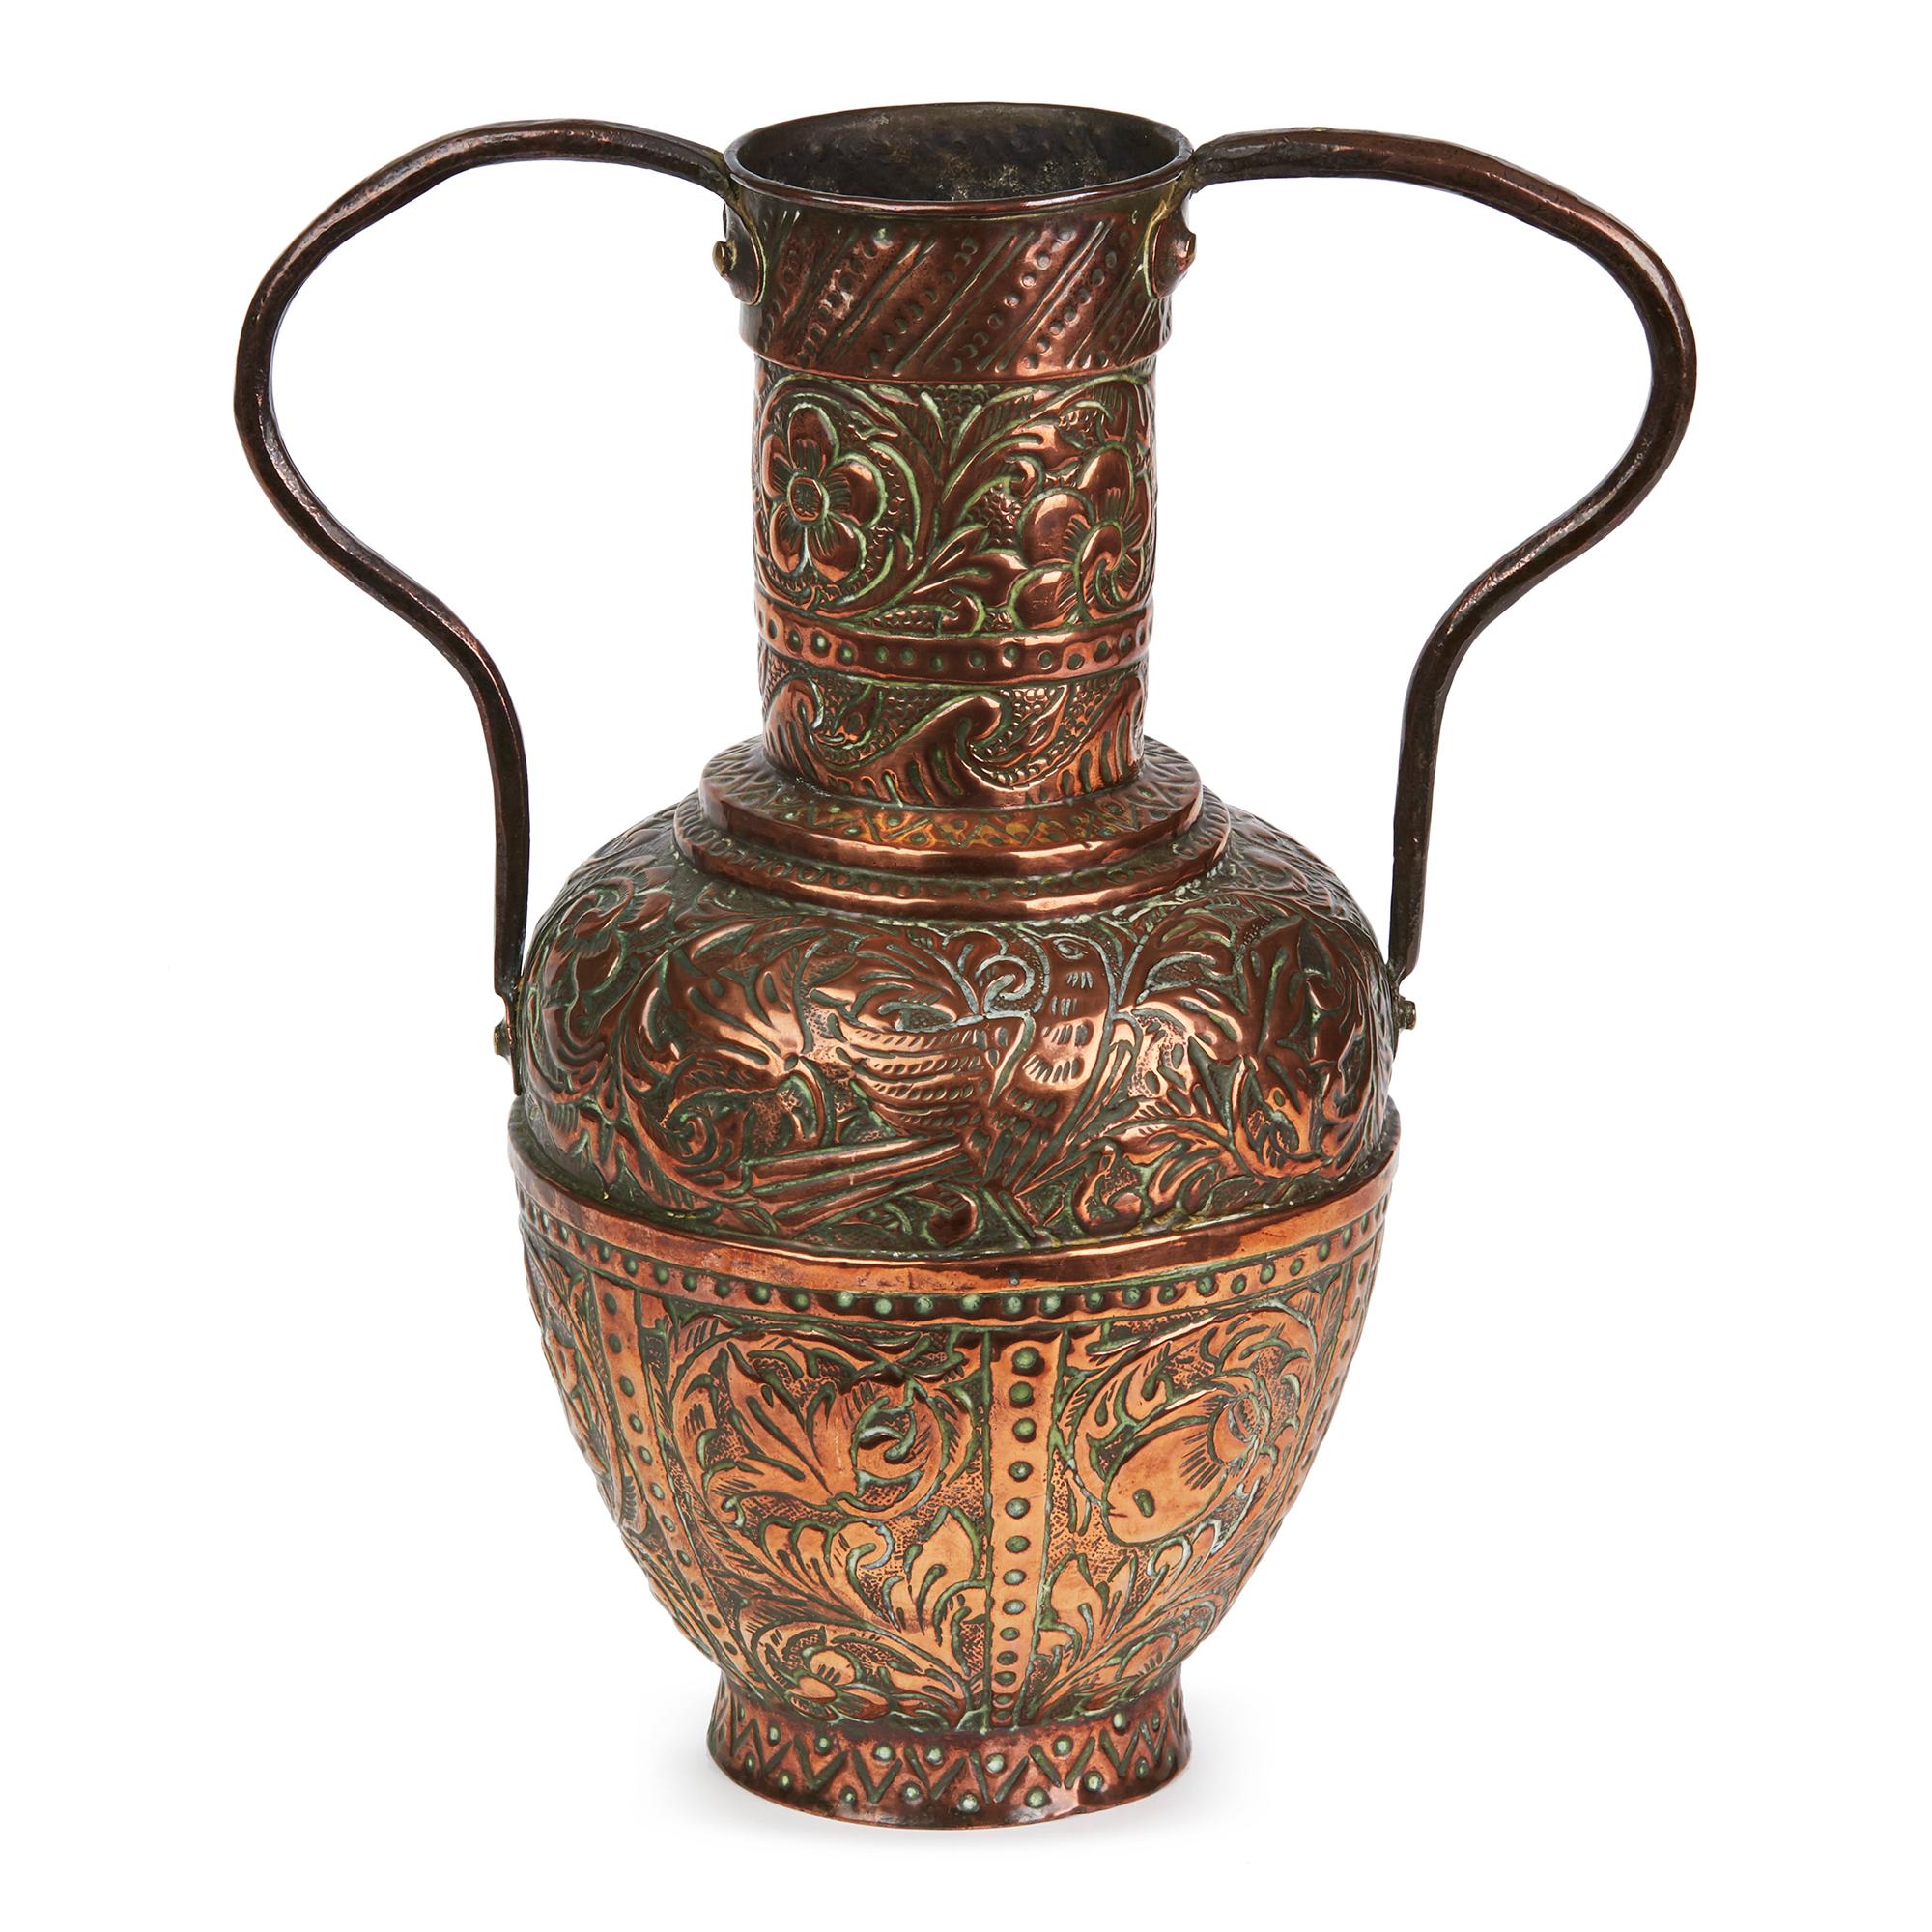 A stylish antique Asian twin handled copper vase decorated with repousse designs. This elegantly made vase, either of Indian or Middle Eastern origin is decorated with panels containing floral and bird designs with thin solid handles applied to